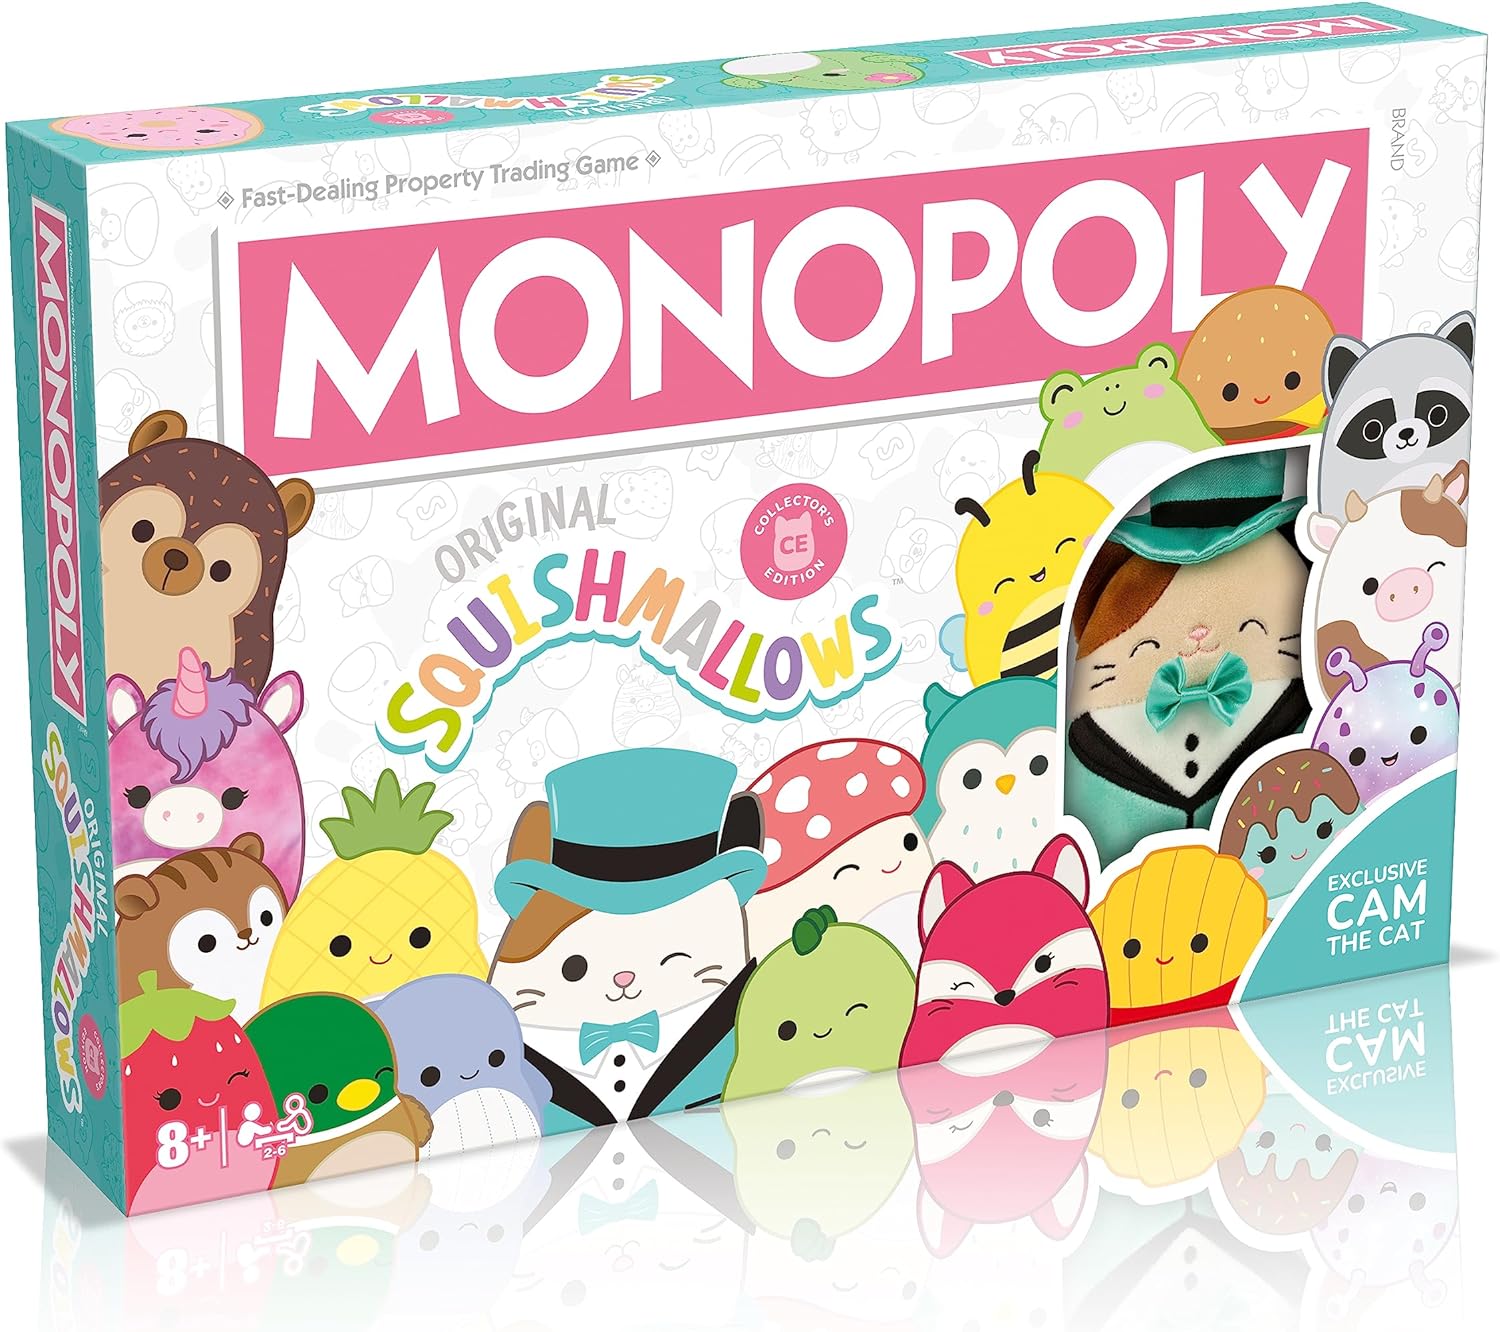 Squishmallows Monopoly Board Game Collectors Edition (With Cam The Cat Plush)